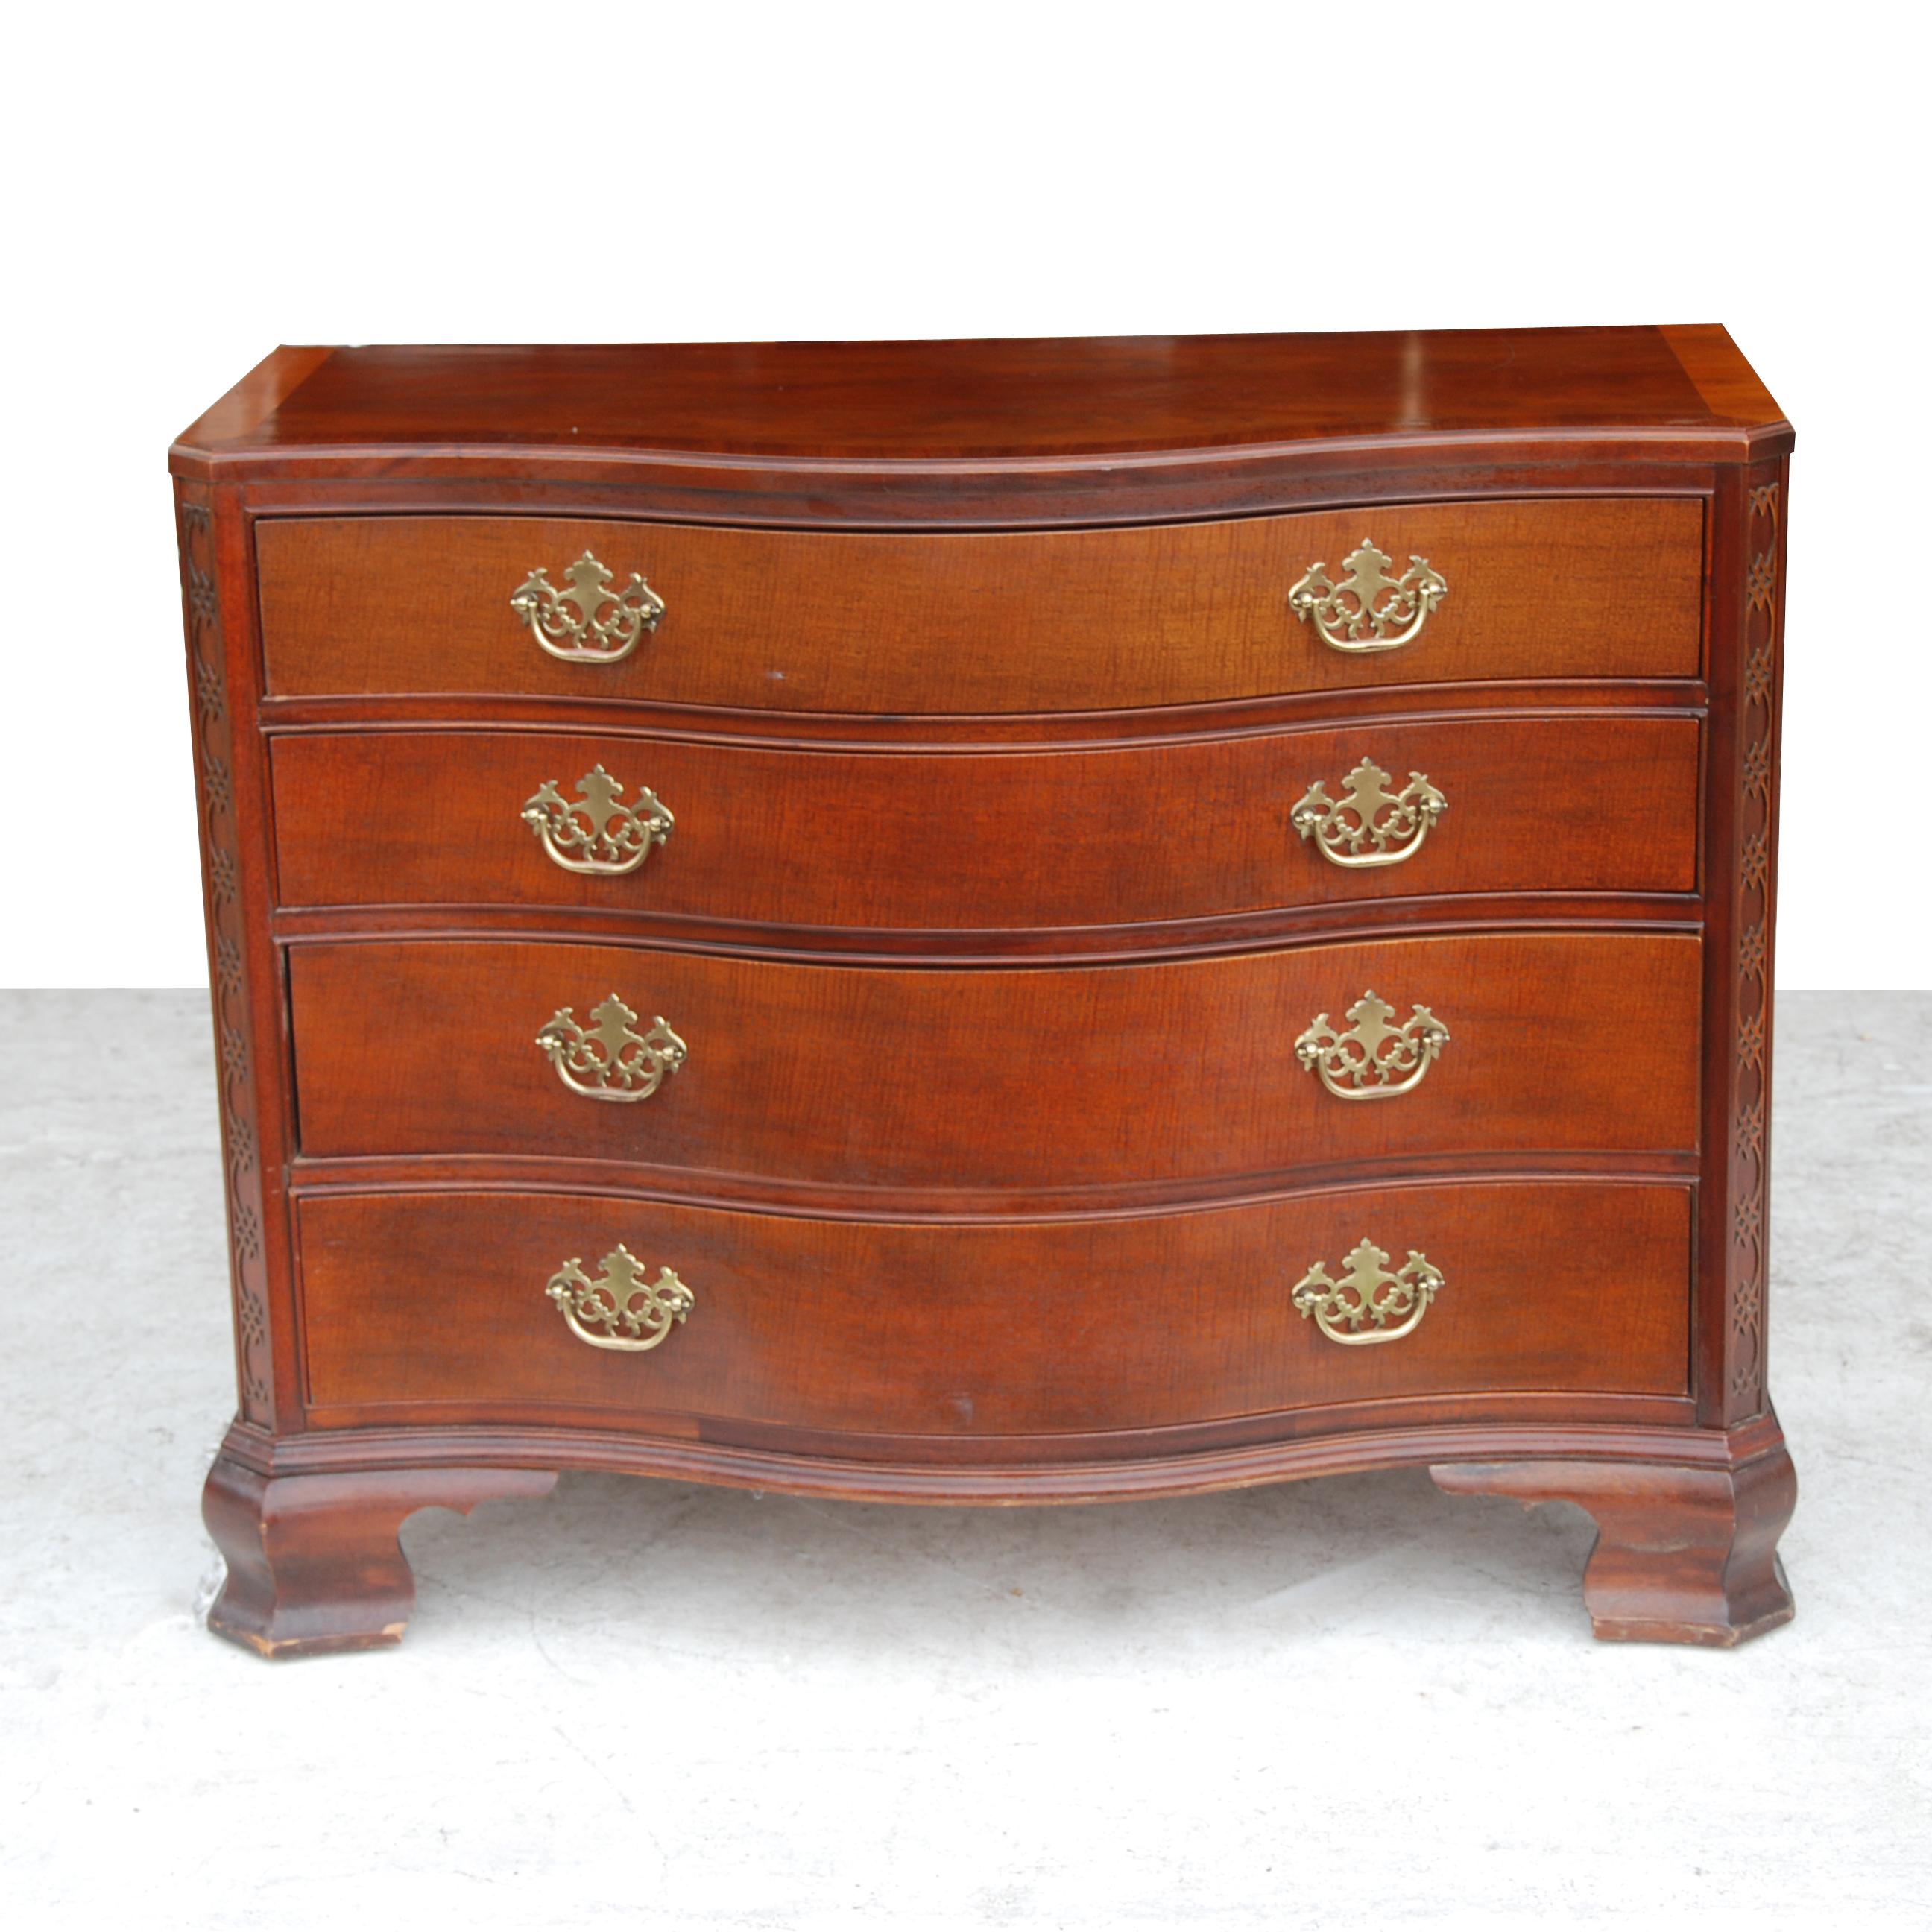 er.
Baker honors Charleston's heritage and its rich history by reproducing this 19th century Bombay chest of drawers.
Part of their “Historic Charleston” collection the top has a hand carved gadroon border that adds elegant sophistication to the